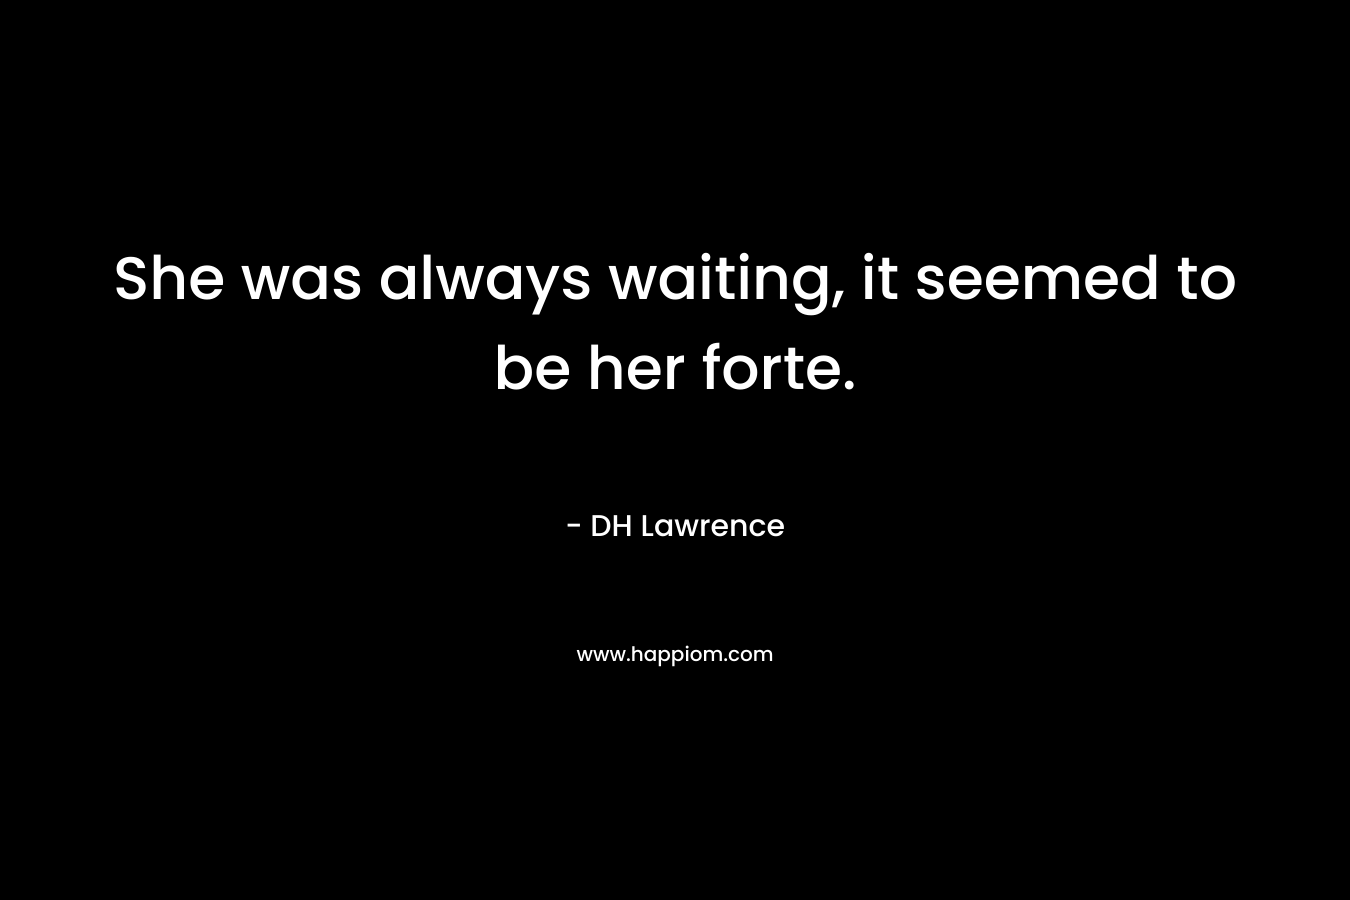 She was always waiting, it seemed to be her forte.